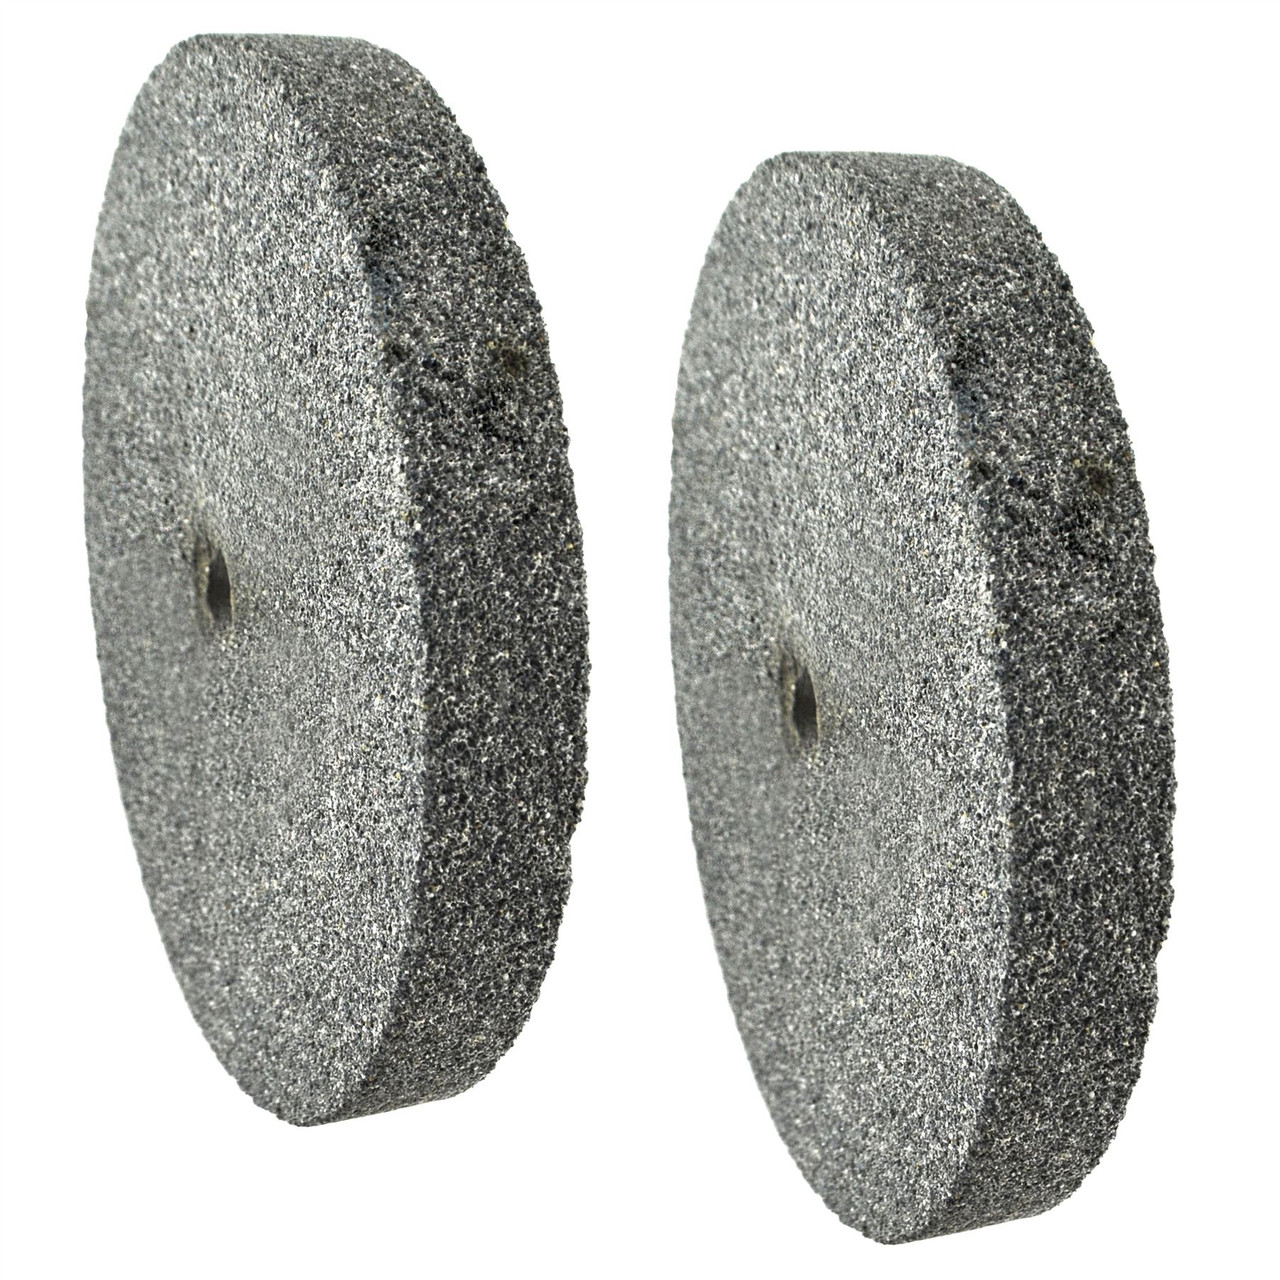 Fine Grinding Wheel Bench Grinder Stone 60 Grit 19mm Thick TE877 150mm 6" 